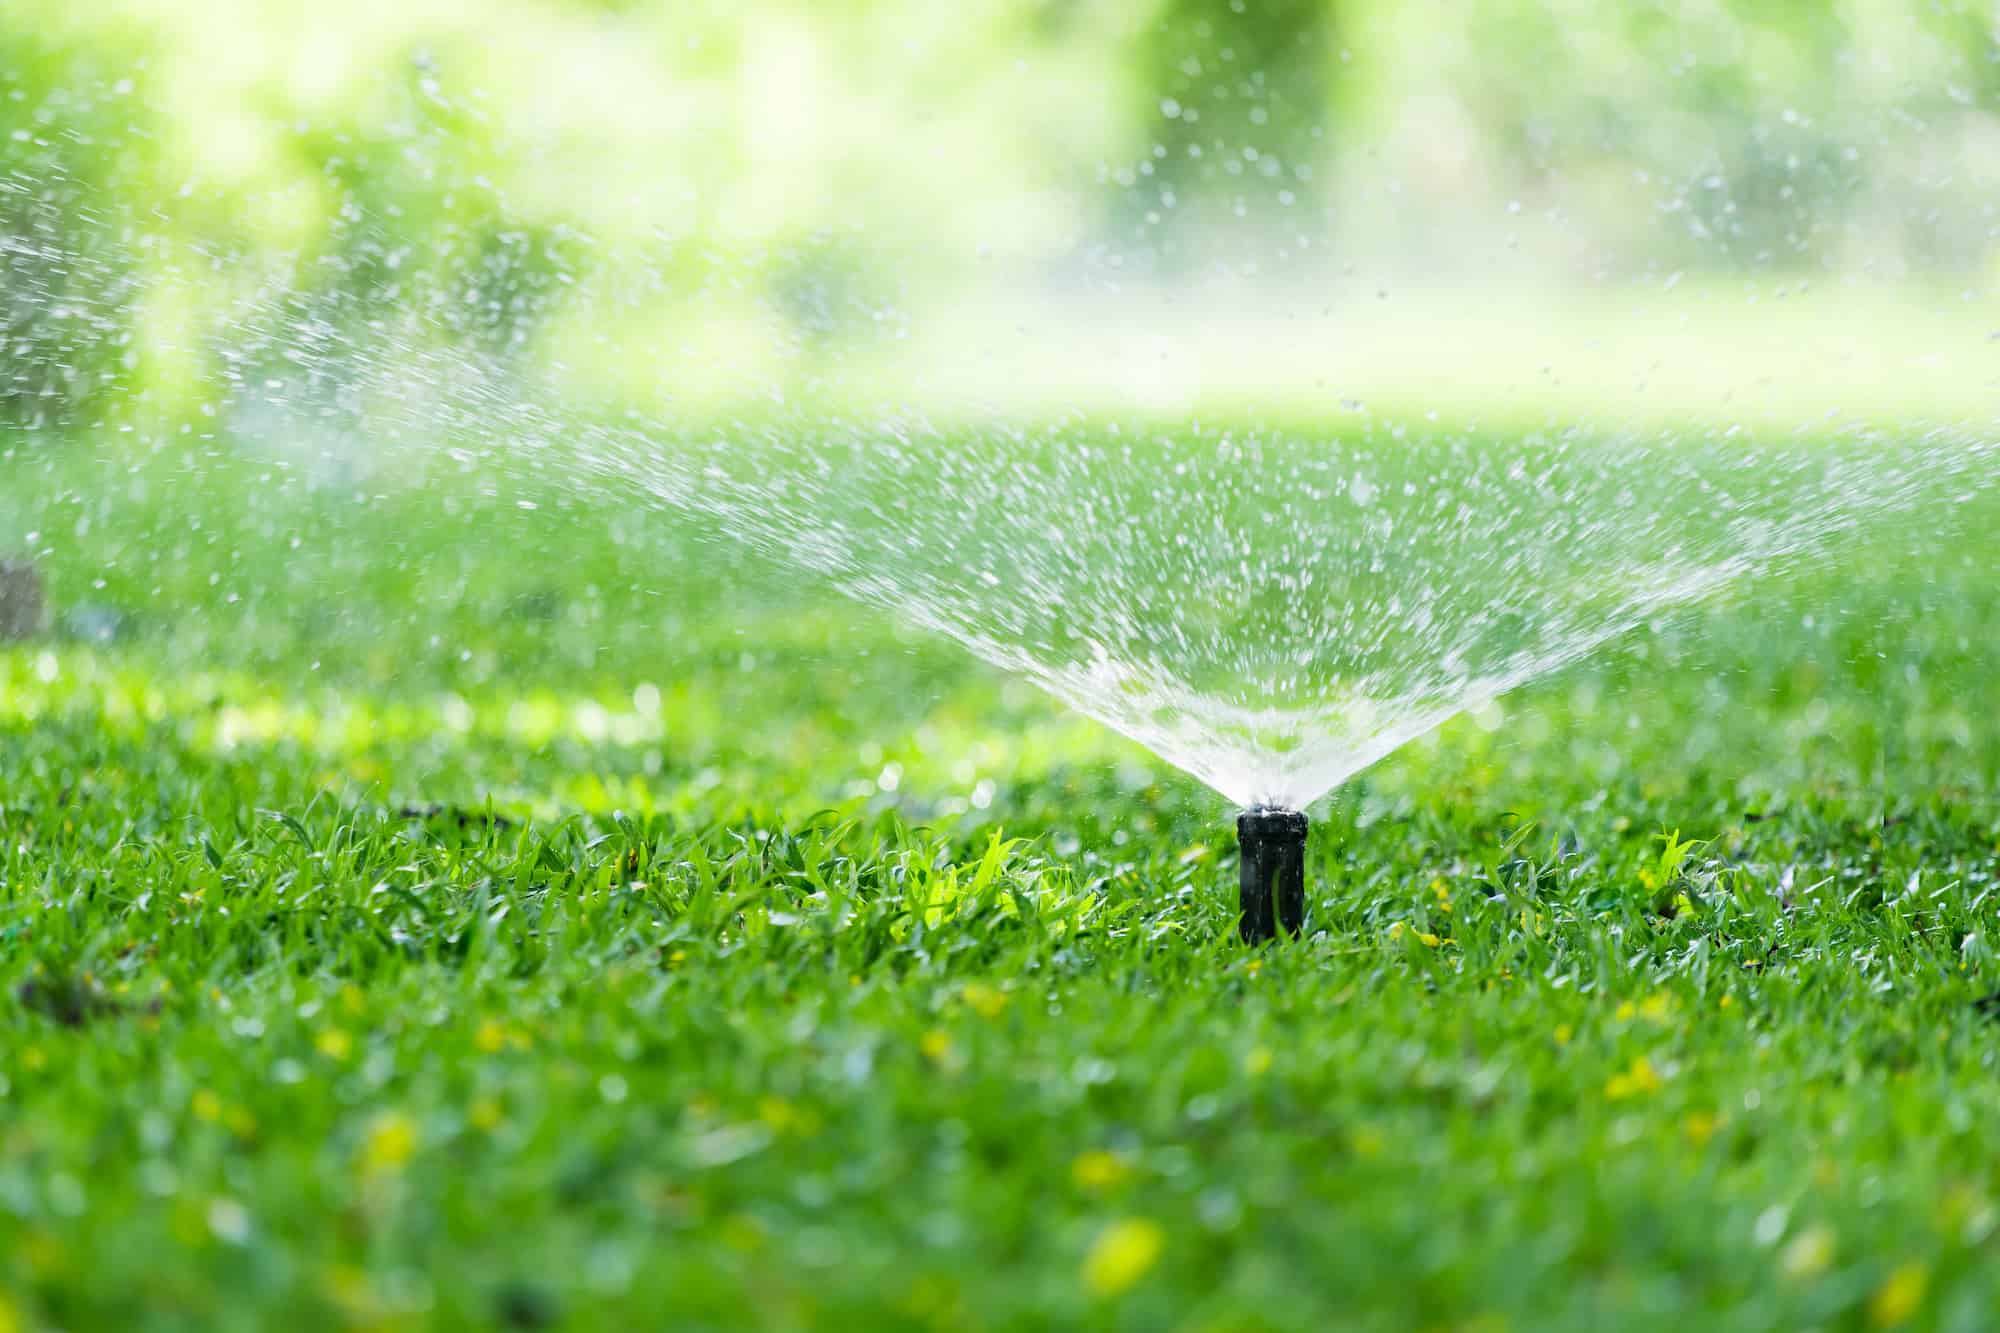 Close-up of an installed sprinkler head spraying water onto green lawn grass